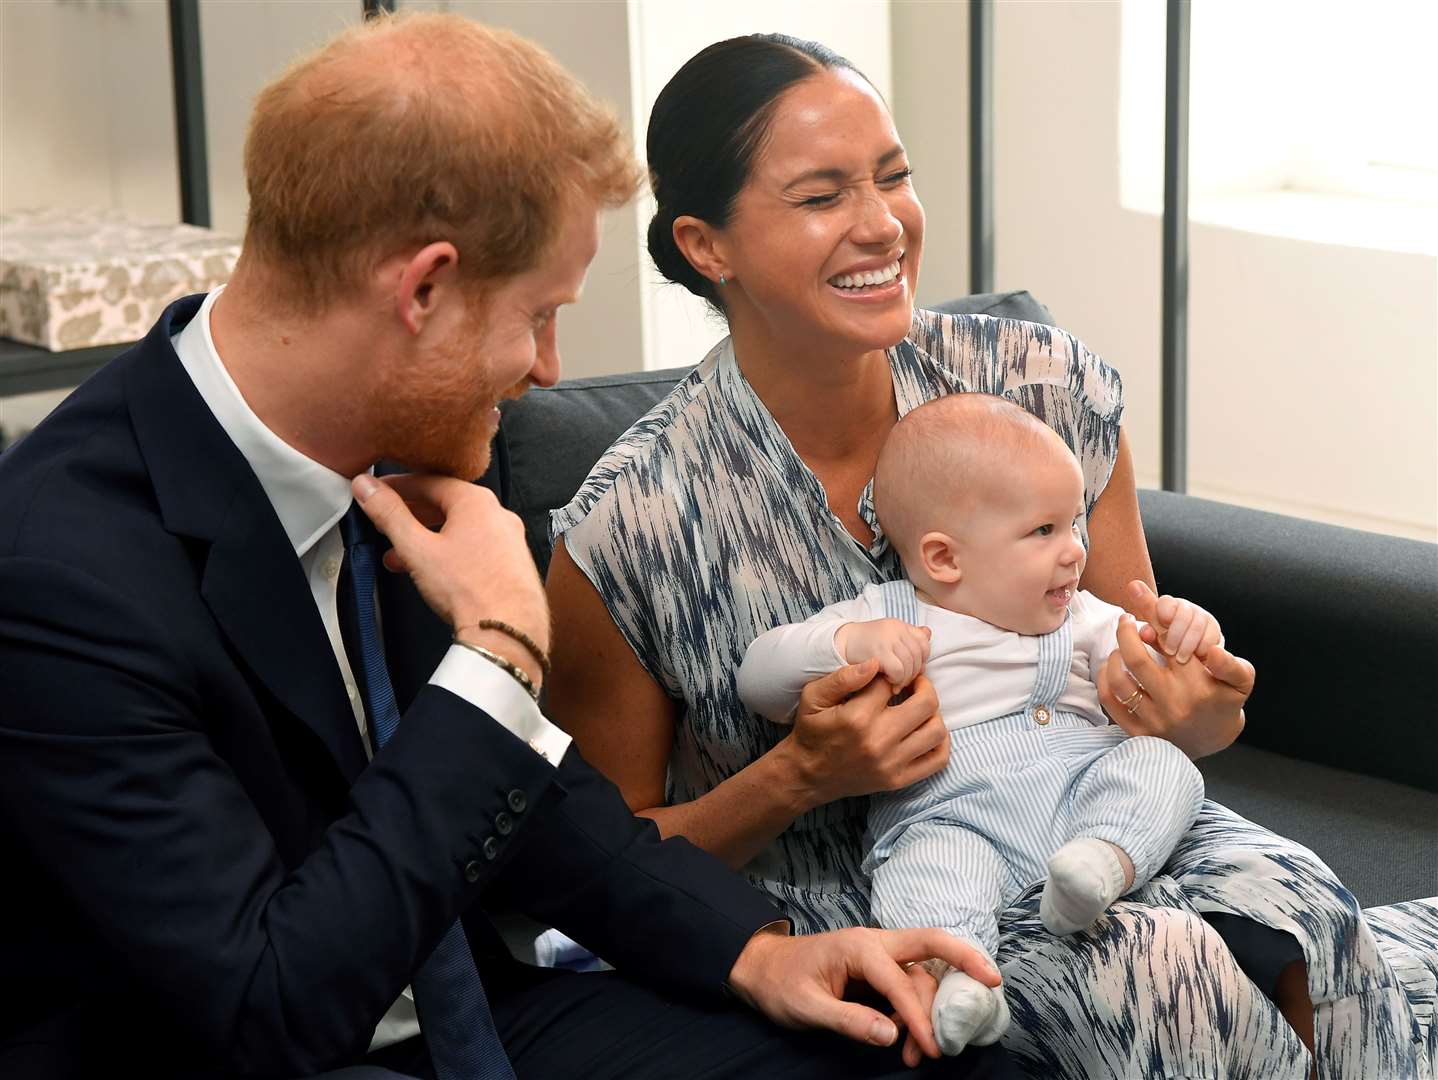 The Duke and Duchess of Sussex holding their son Archie during a tour of South Africa in 2019 (Toby Melville/PA)